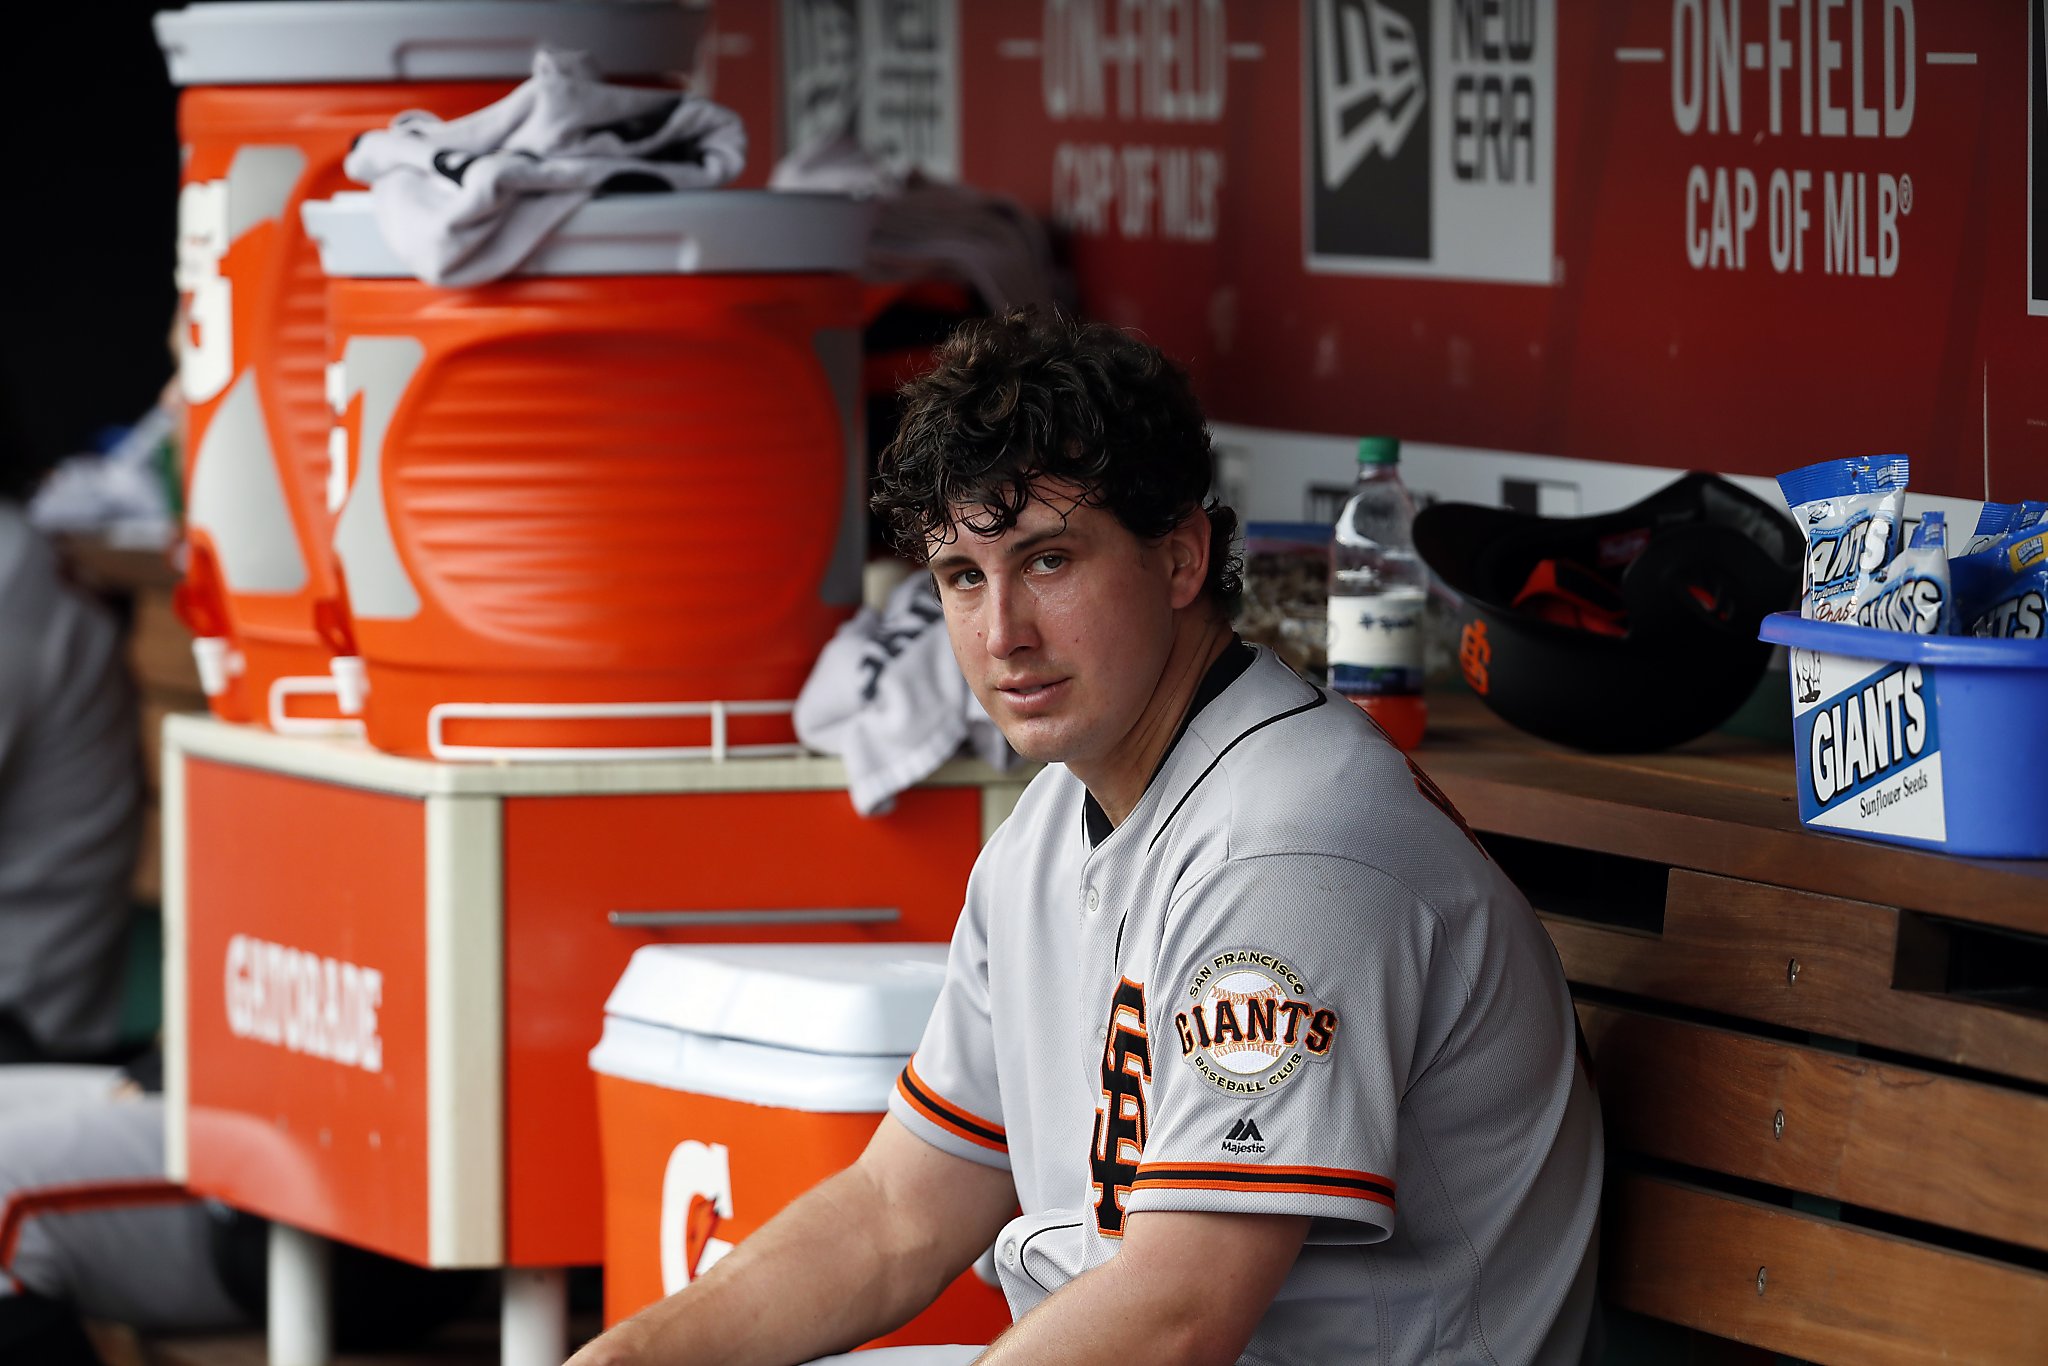 Giants face Dodgers, play medical Whack-a-Mole